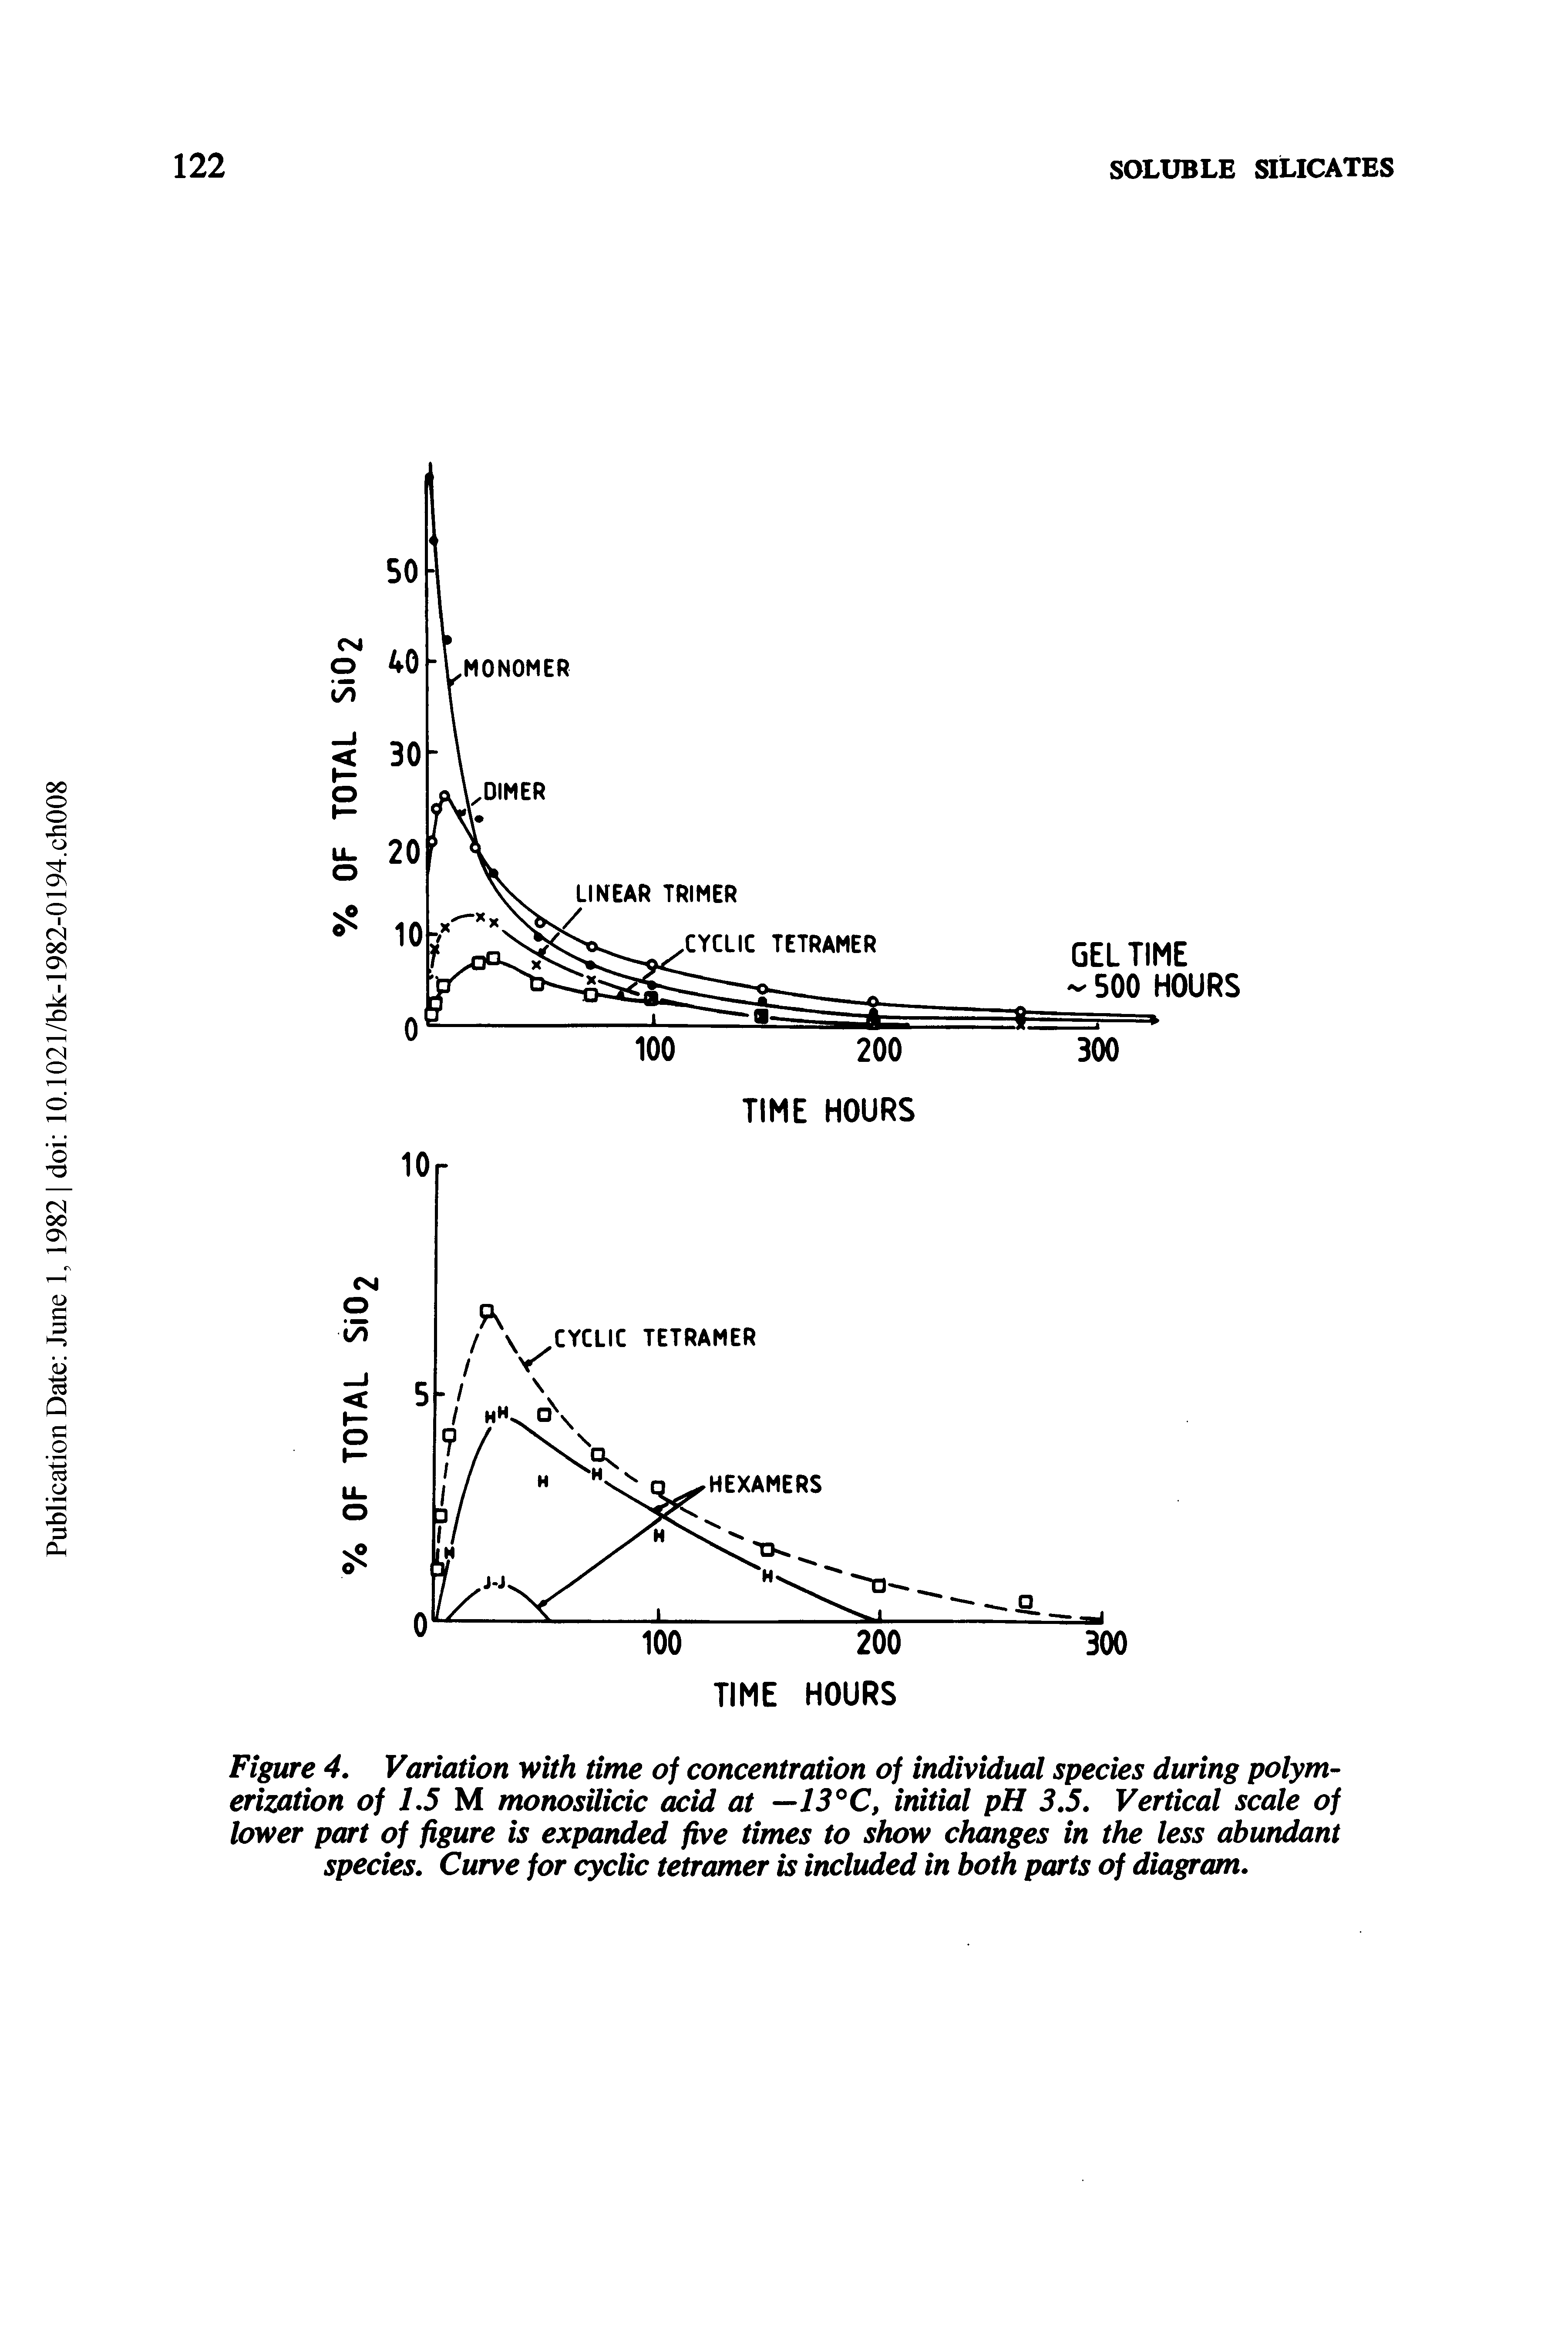 Figure 4. Variation with time of concentration of individual species during polymerization of L5 M monosilicic acid at —13°C, initial pH 3.5. Vertical scale of lower part of figure is expanded five times to show changes in the less abundant species. Curve for cyclic tetramer is included in both parts of diagram.